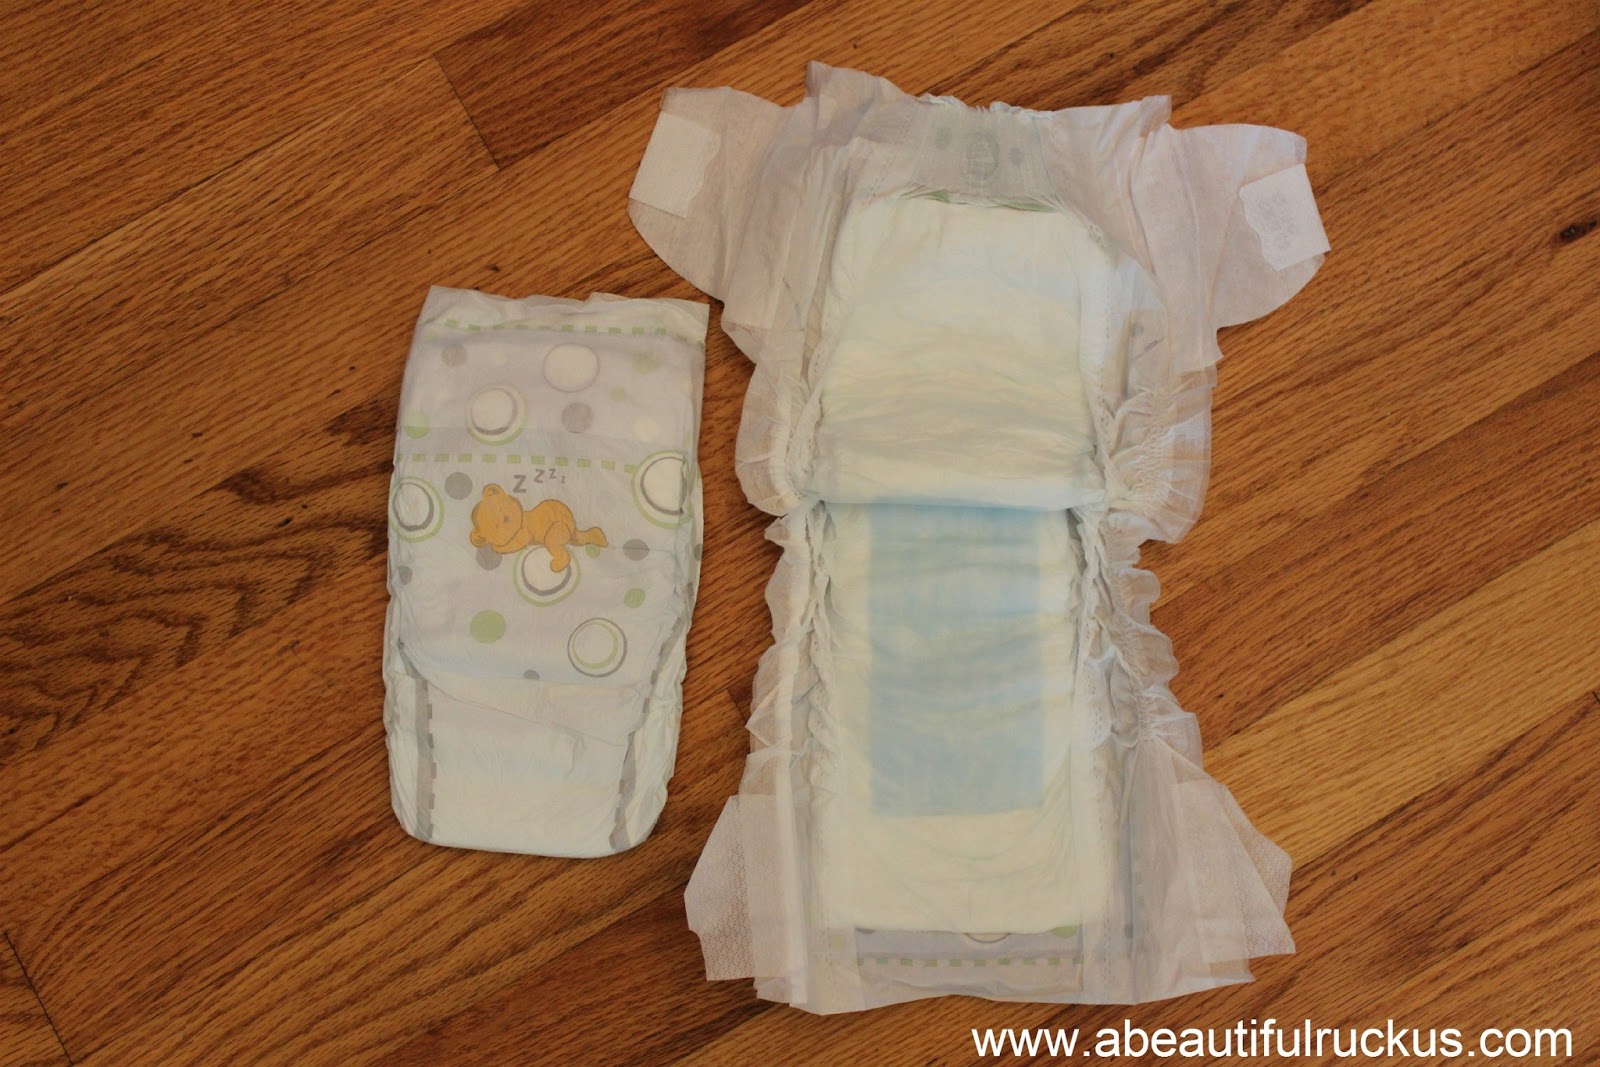 A Beautiful Ruckus: Parent's Choice Overnight Diapers...Convenient and